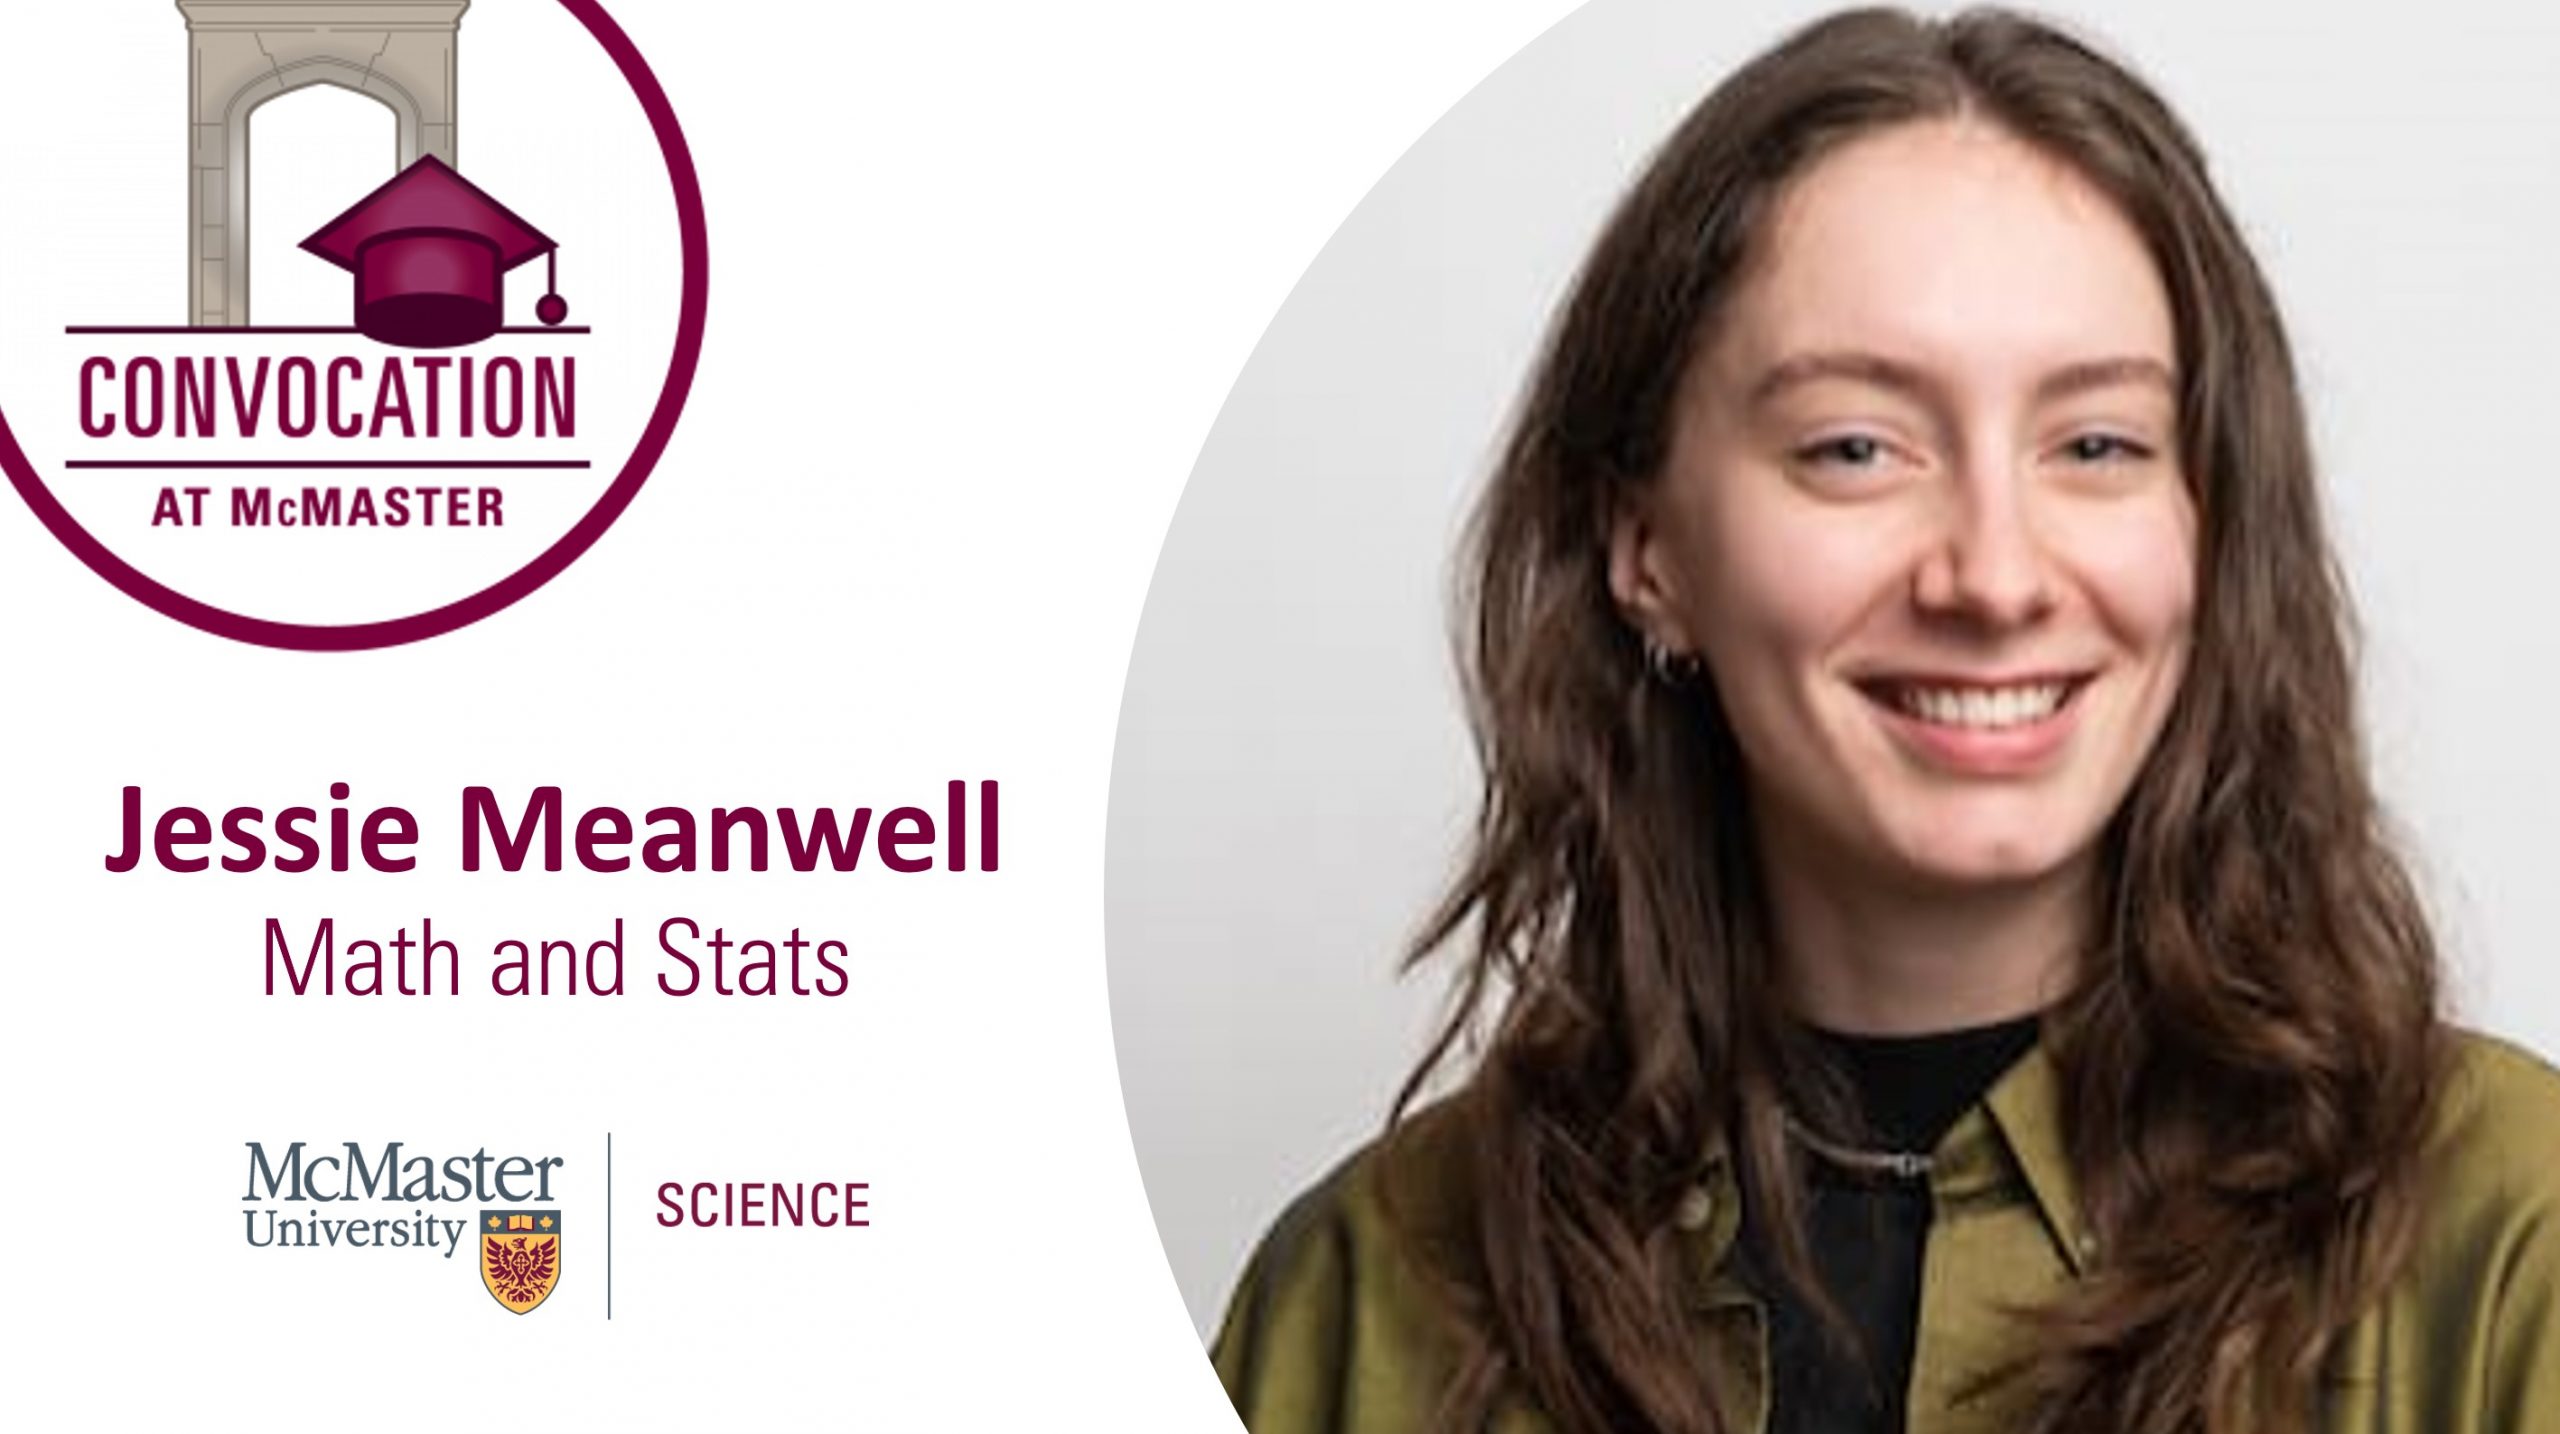 Portrait of Jessis Meanwell with the convocation logo and mcmaster science logo